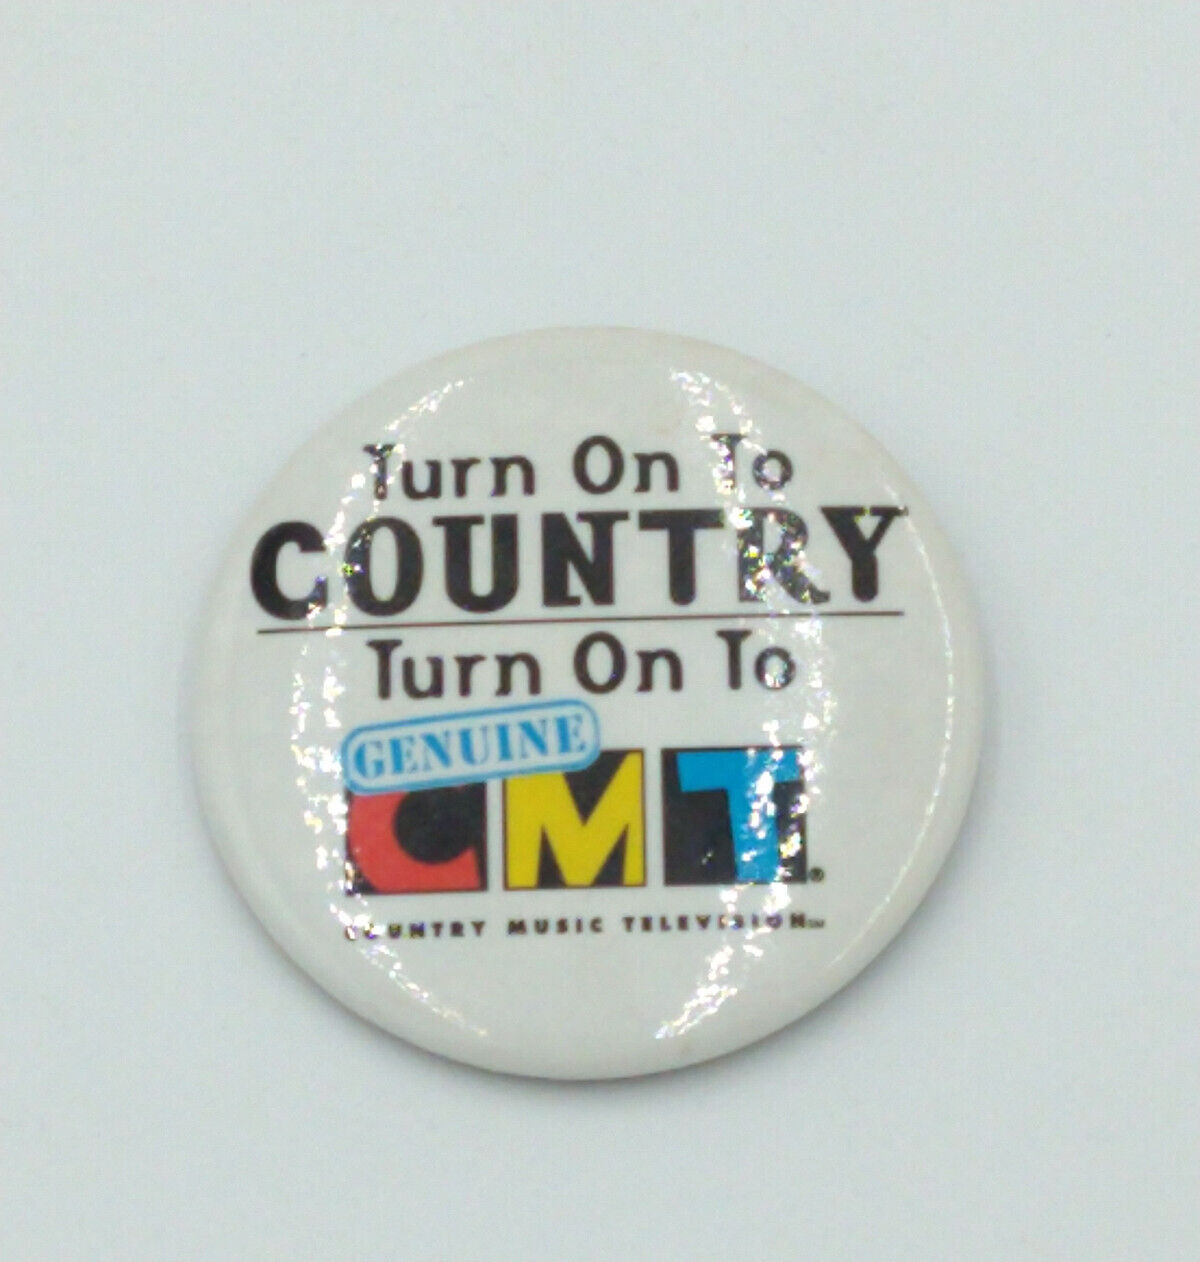 CMT COUNTRY MUSIC TELEVISION ROUND PIN BUTTON 2.5